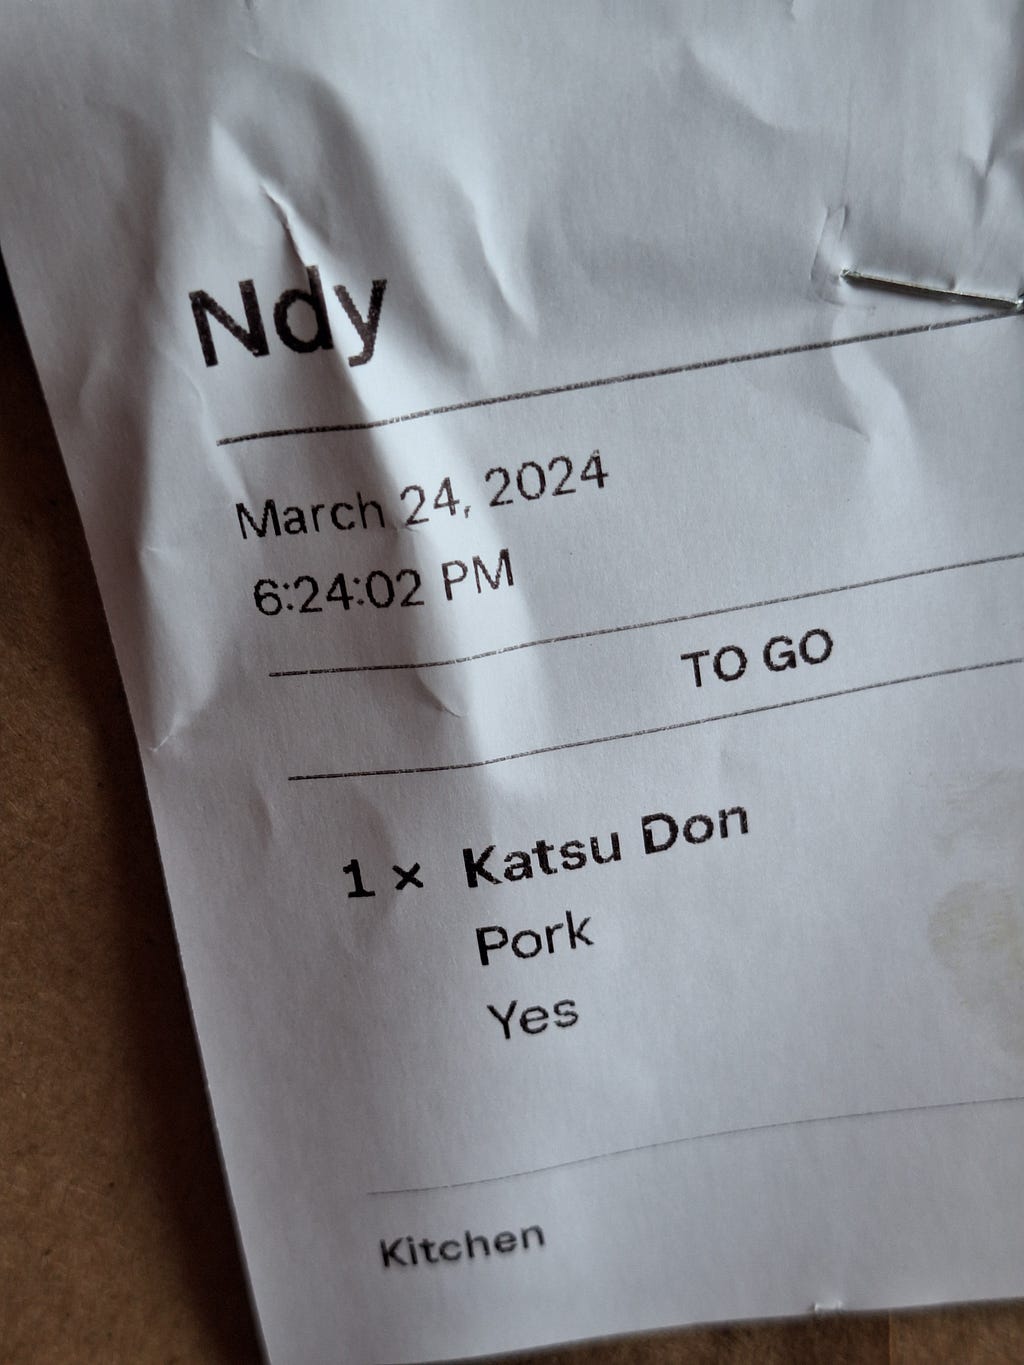 A receipt for “Ndy”, which is almost my name, saying 1x Katsu Don, Pork, yes. Pork. YES.